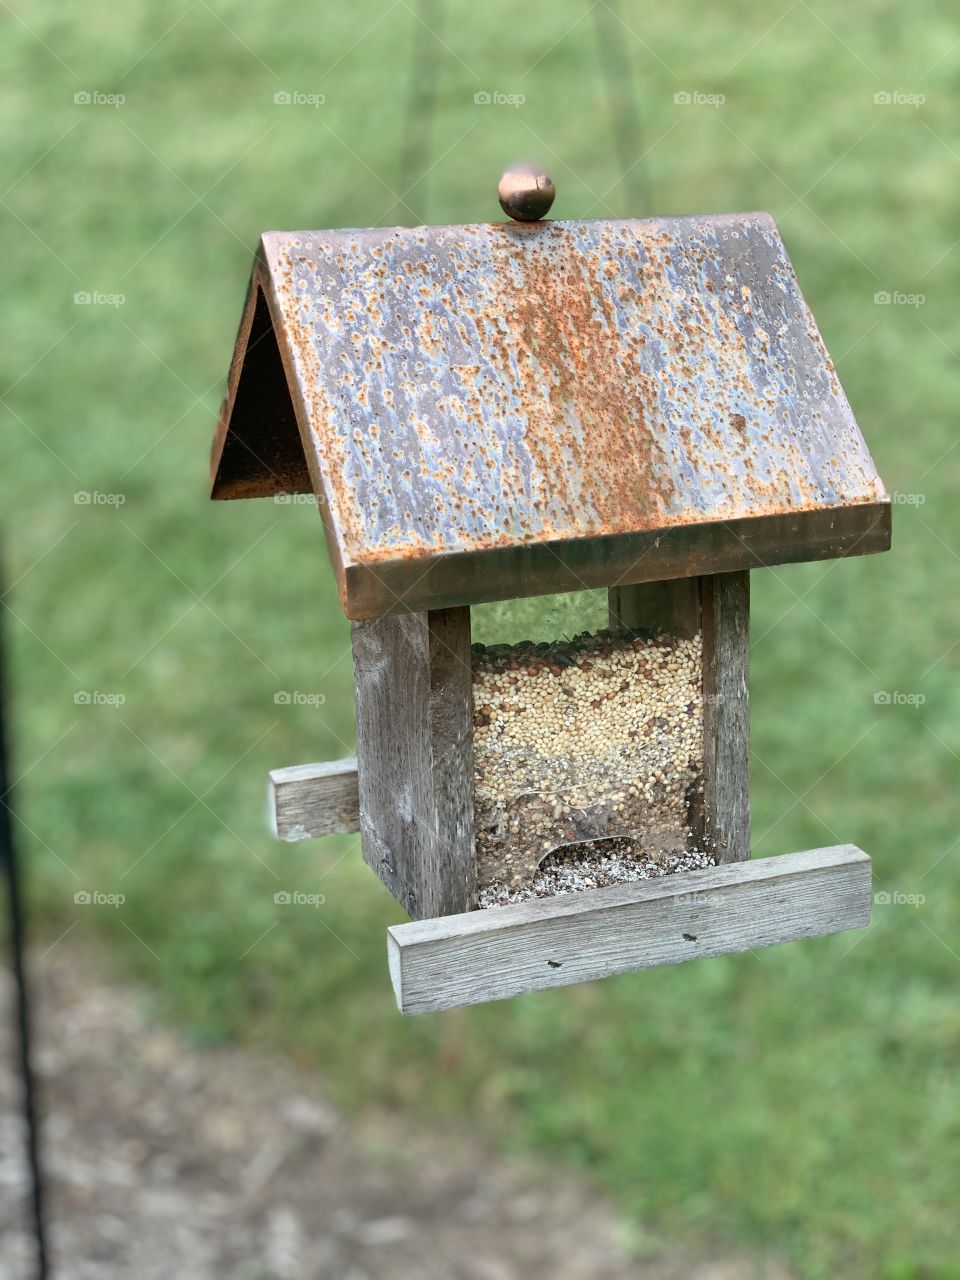 Pretty little wooden birdhouse with bird seed in the front yard. If only there was a cardinal or robin it’d be perfect!